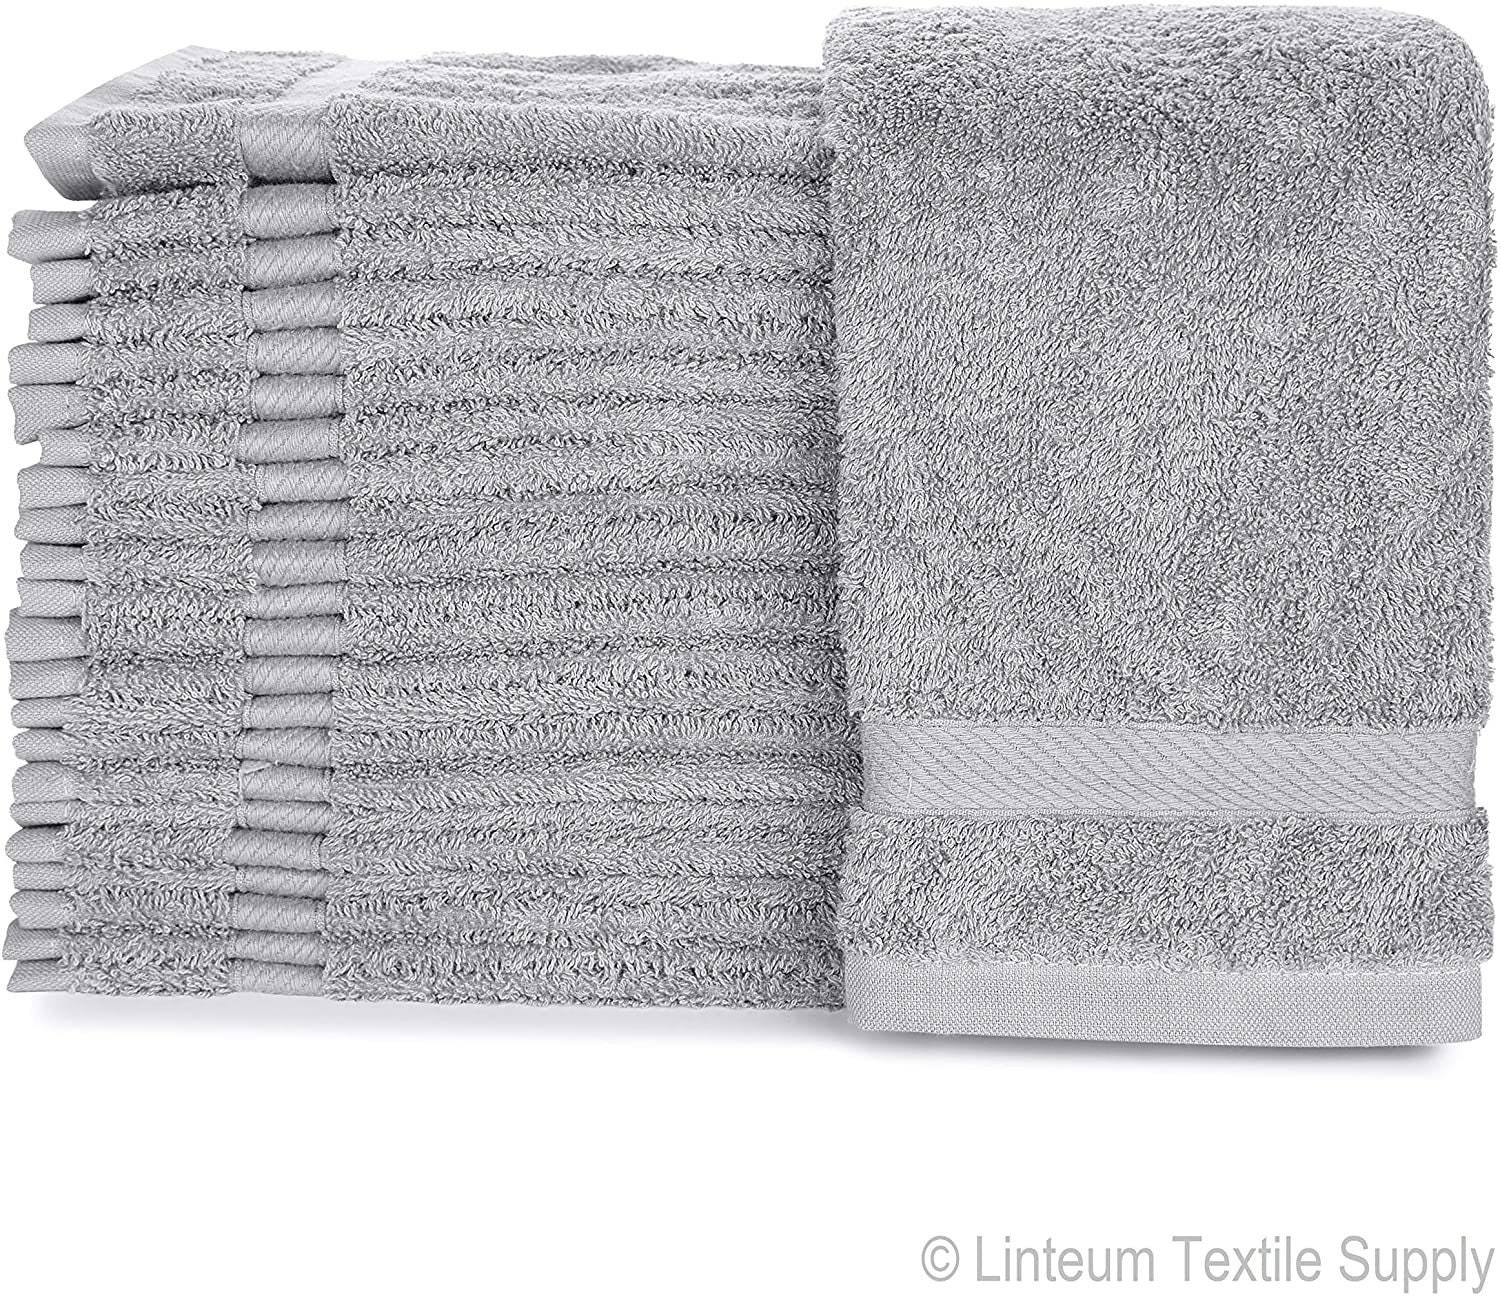 12-pack 16x27 In 4 Lb Luxury Hand Towels 100% Cotton - Etsy